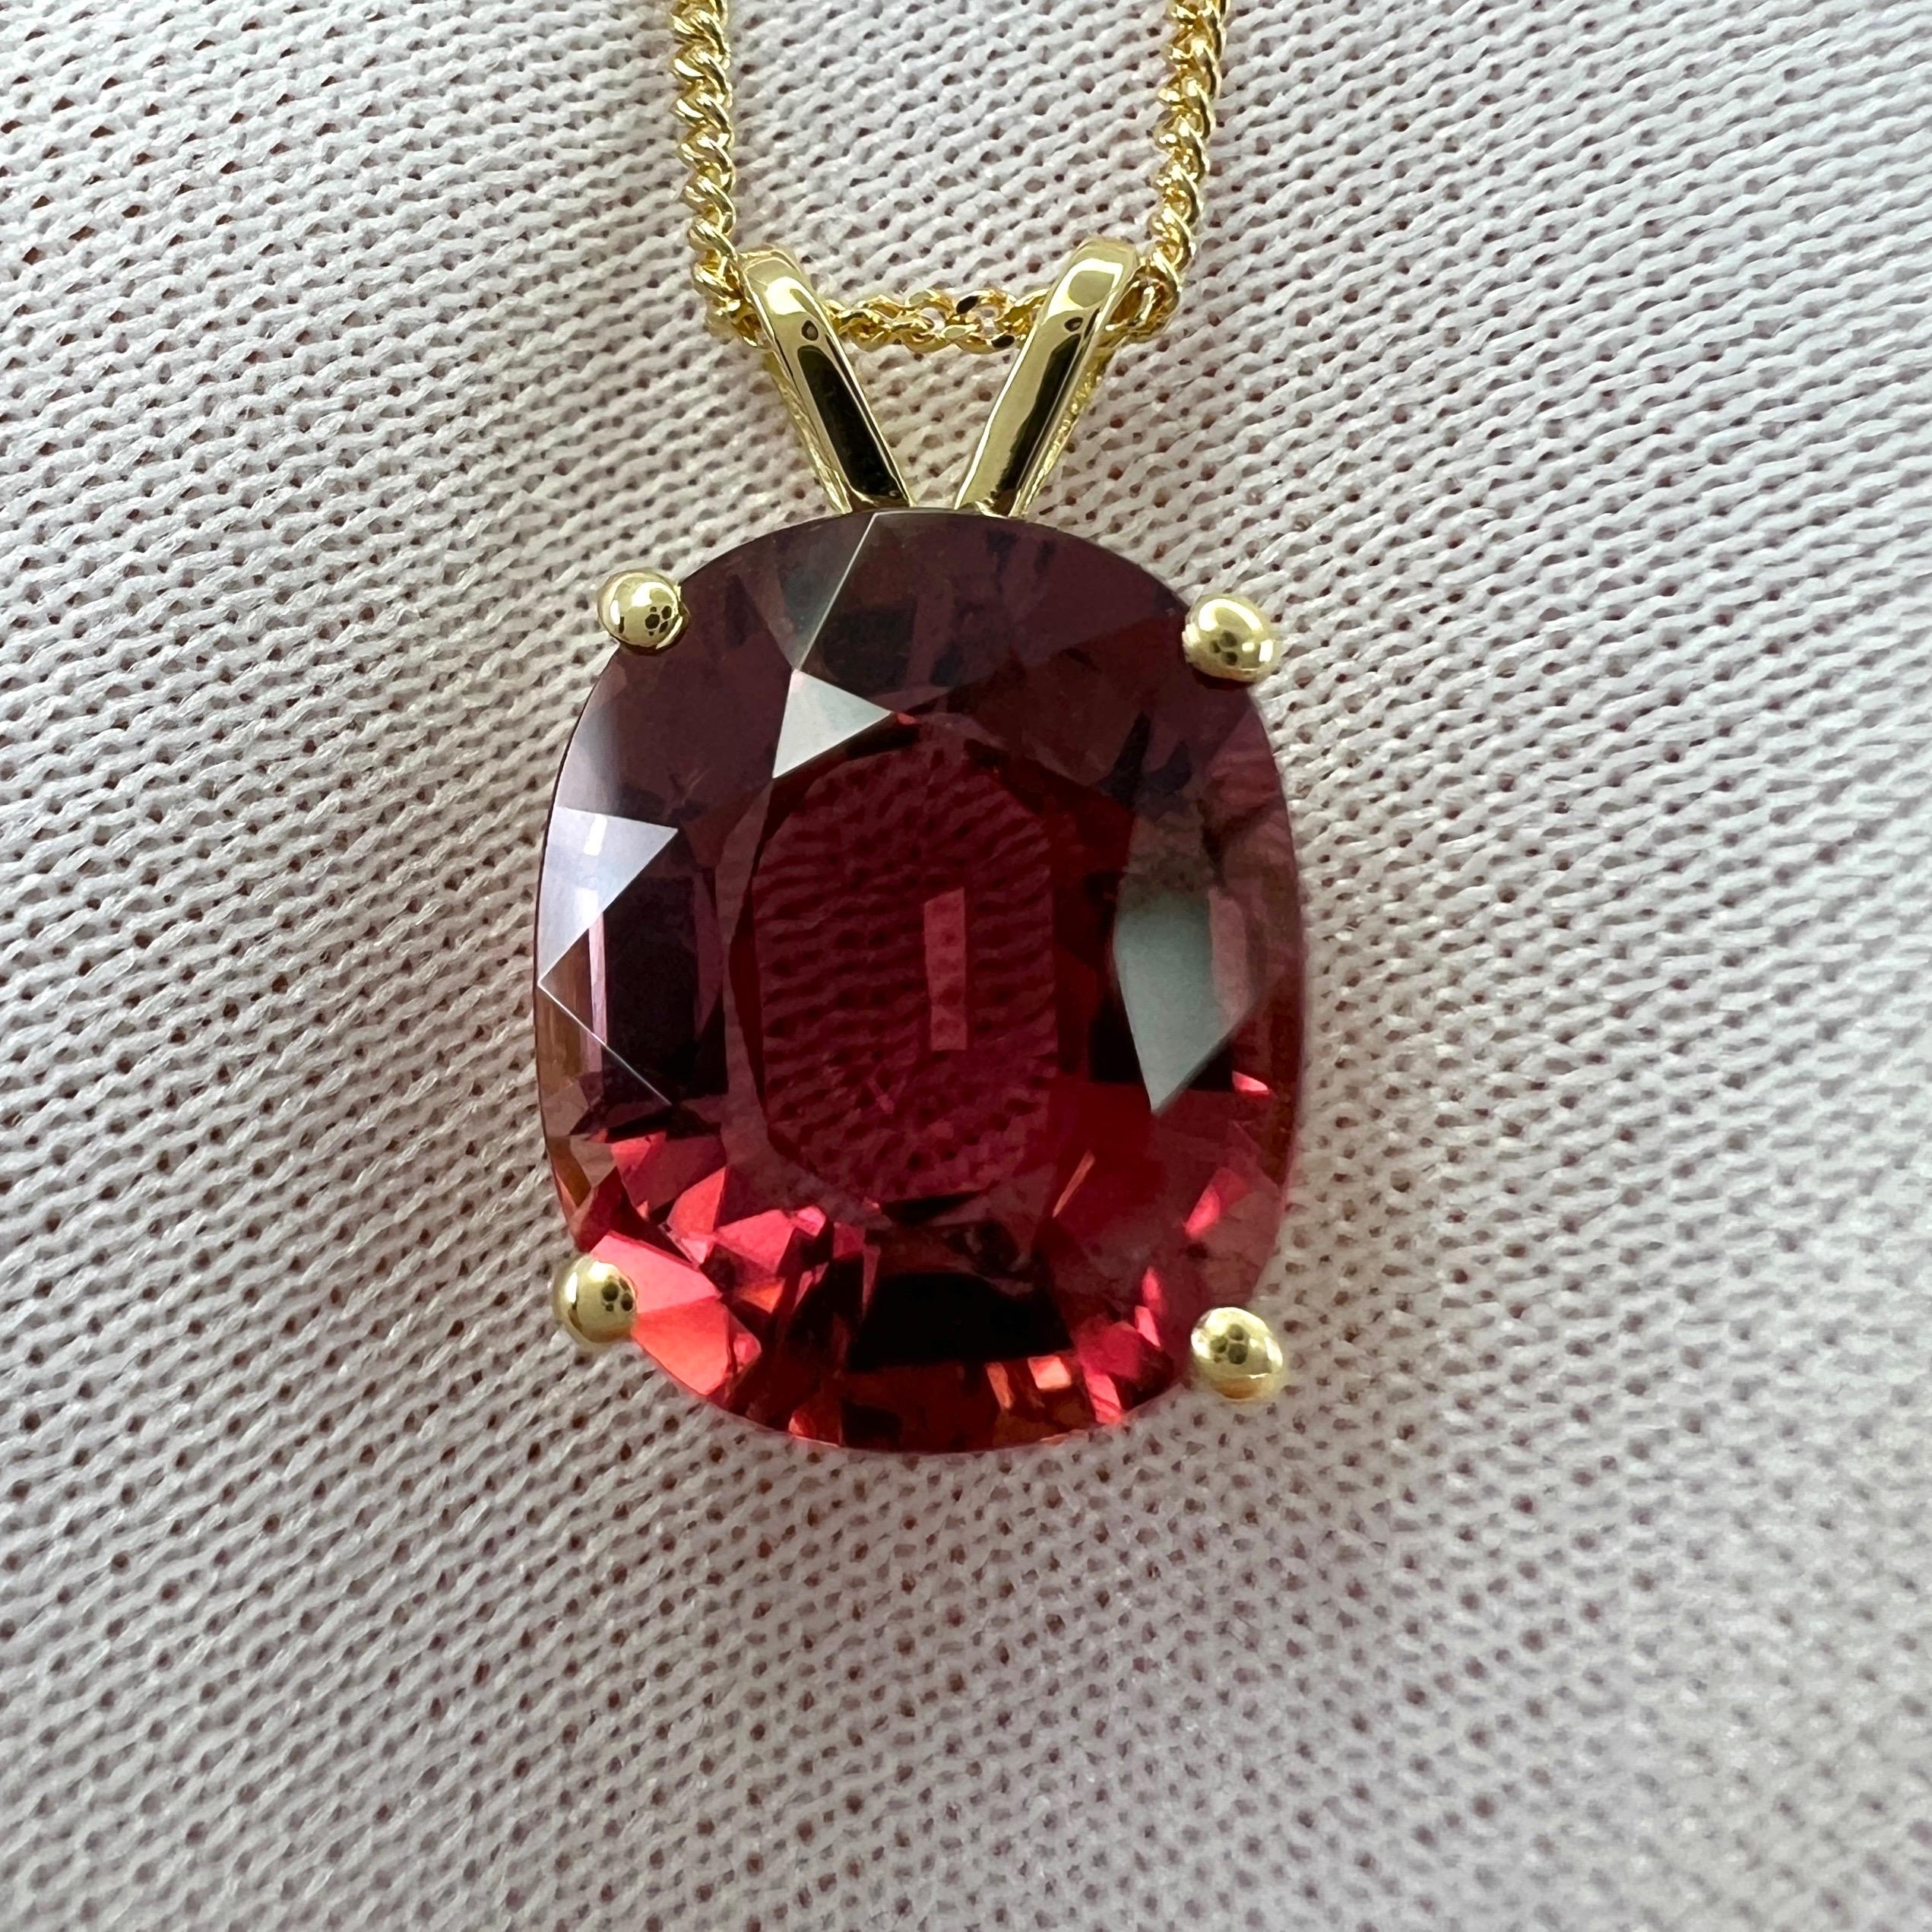 Fancy Oval Cut Pink Orange Rubellite Tourmaline 18k Yellow Gold Pendant Necklace. 

5.35 Carat rubellite tourmaline with a beautiful bright pink orange colour, very good clarity and an excellent oval cut.
Set in a fine 18k yellow gold solitaire